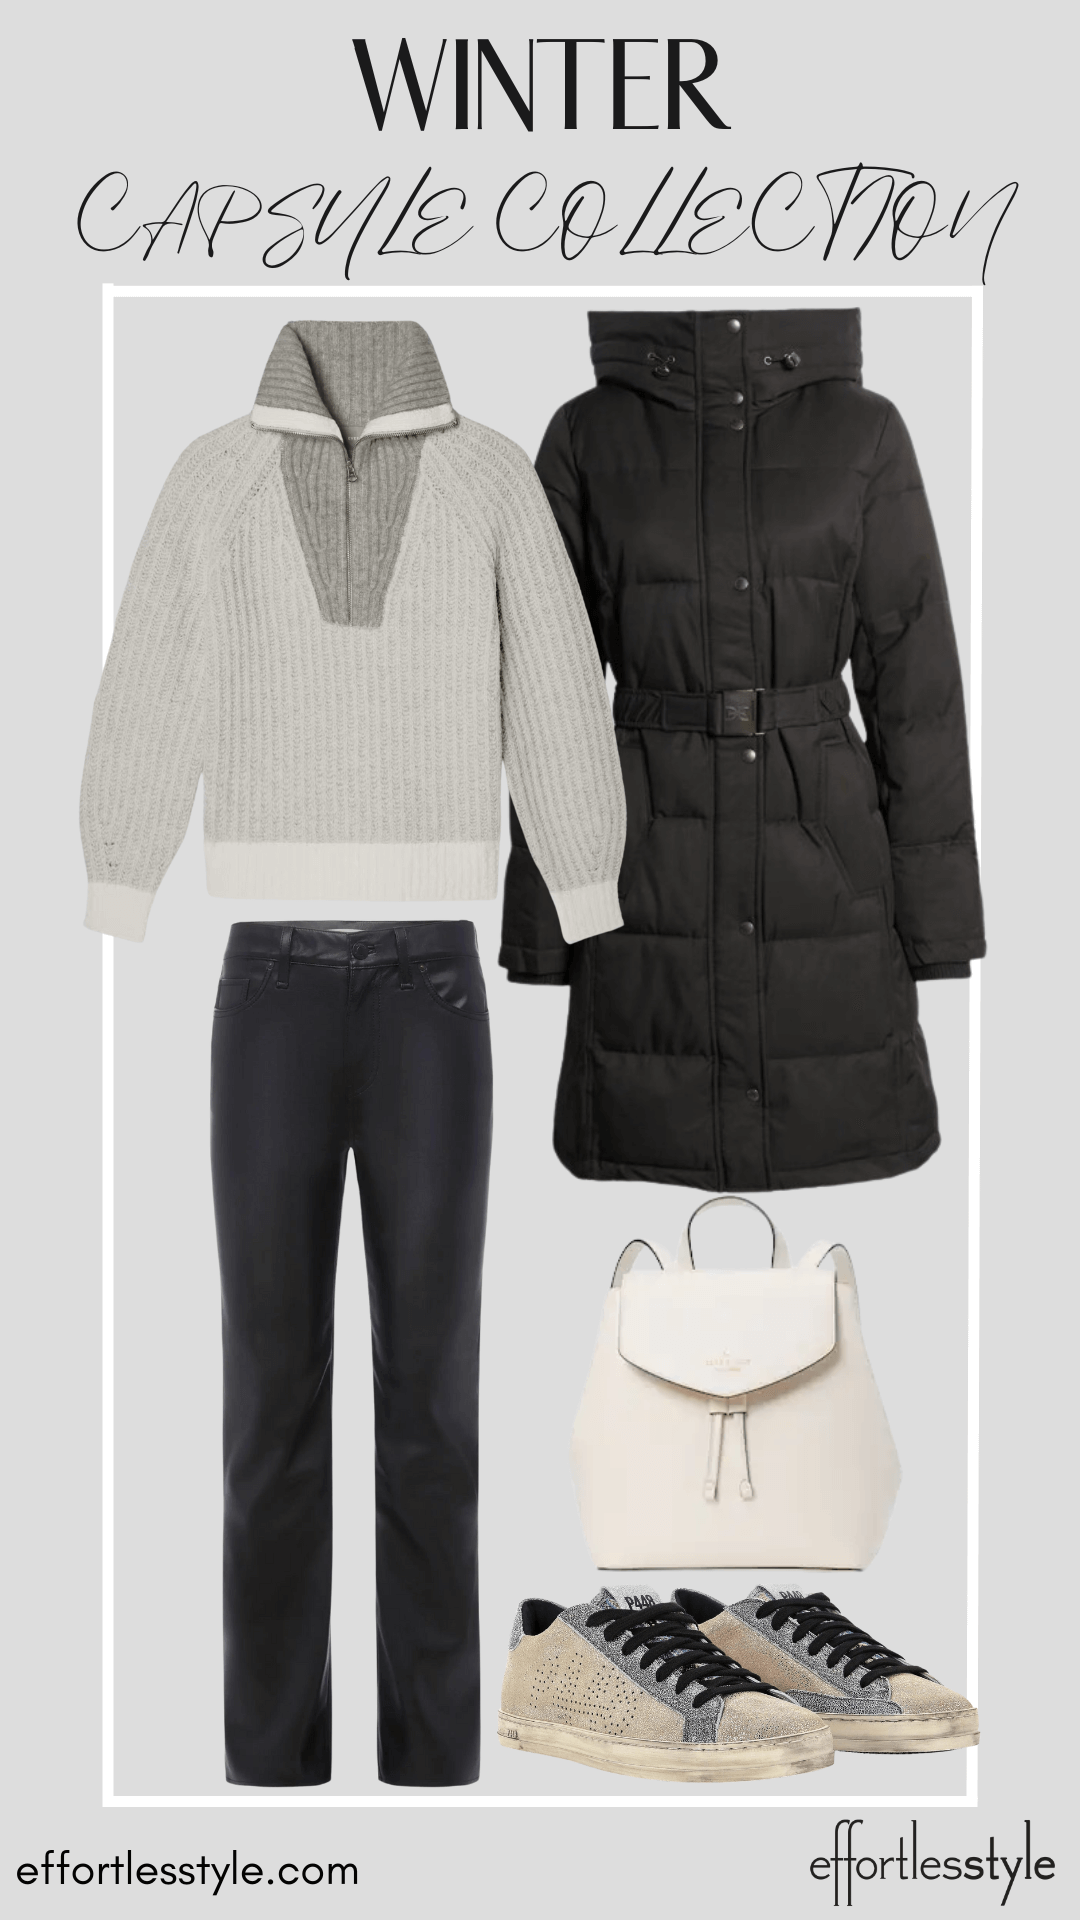 How To Wear Our Winter Capsule Wardrobe - Part 1 Half-Zip Sweater & Faux Leather Pants how to dress up your casual sweater how to wear faux leather pants with a casual sweater how to style your faux leather pants with sneakers